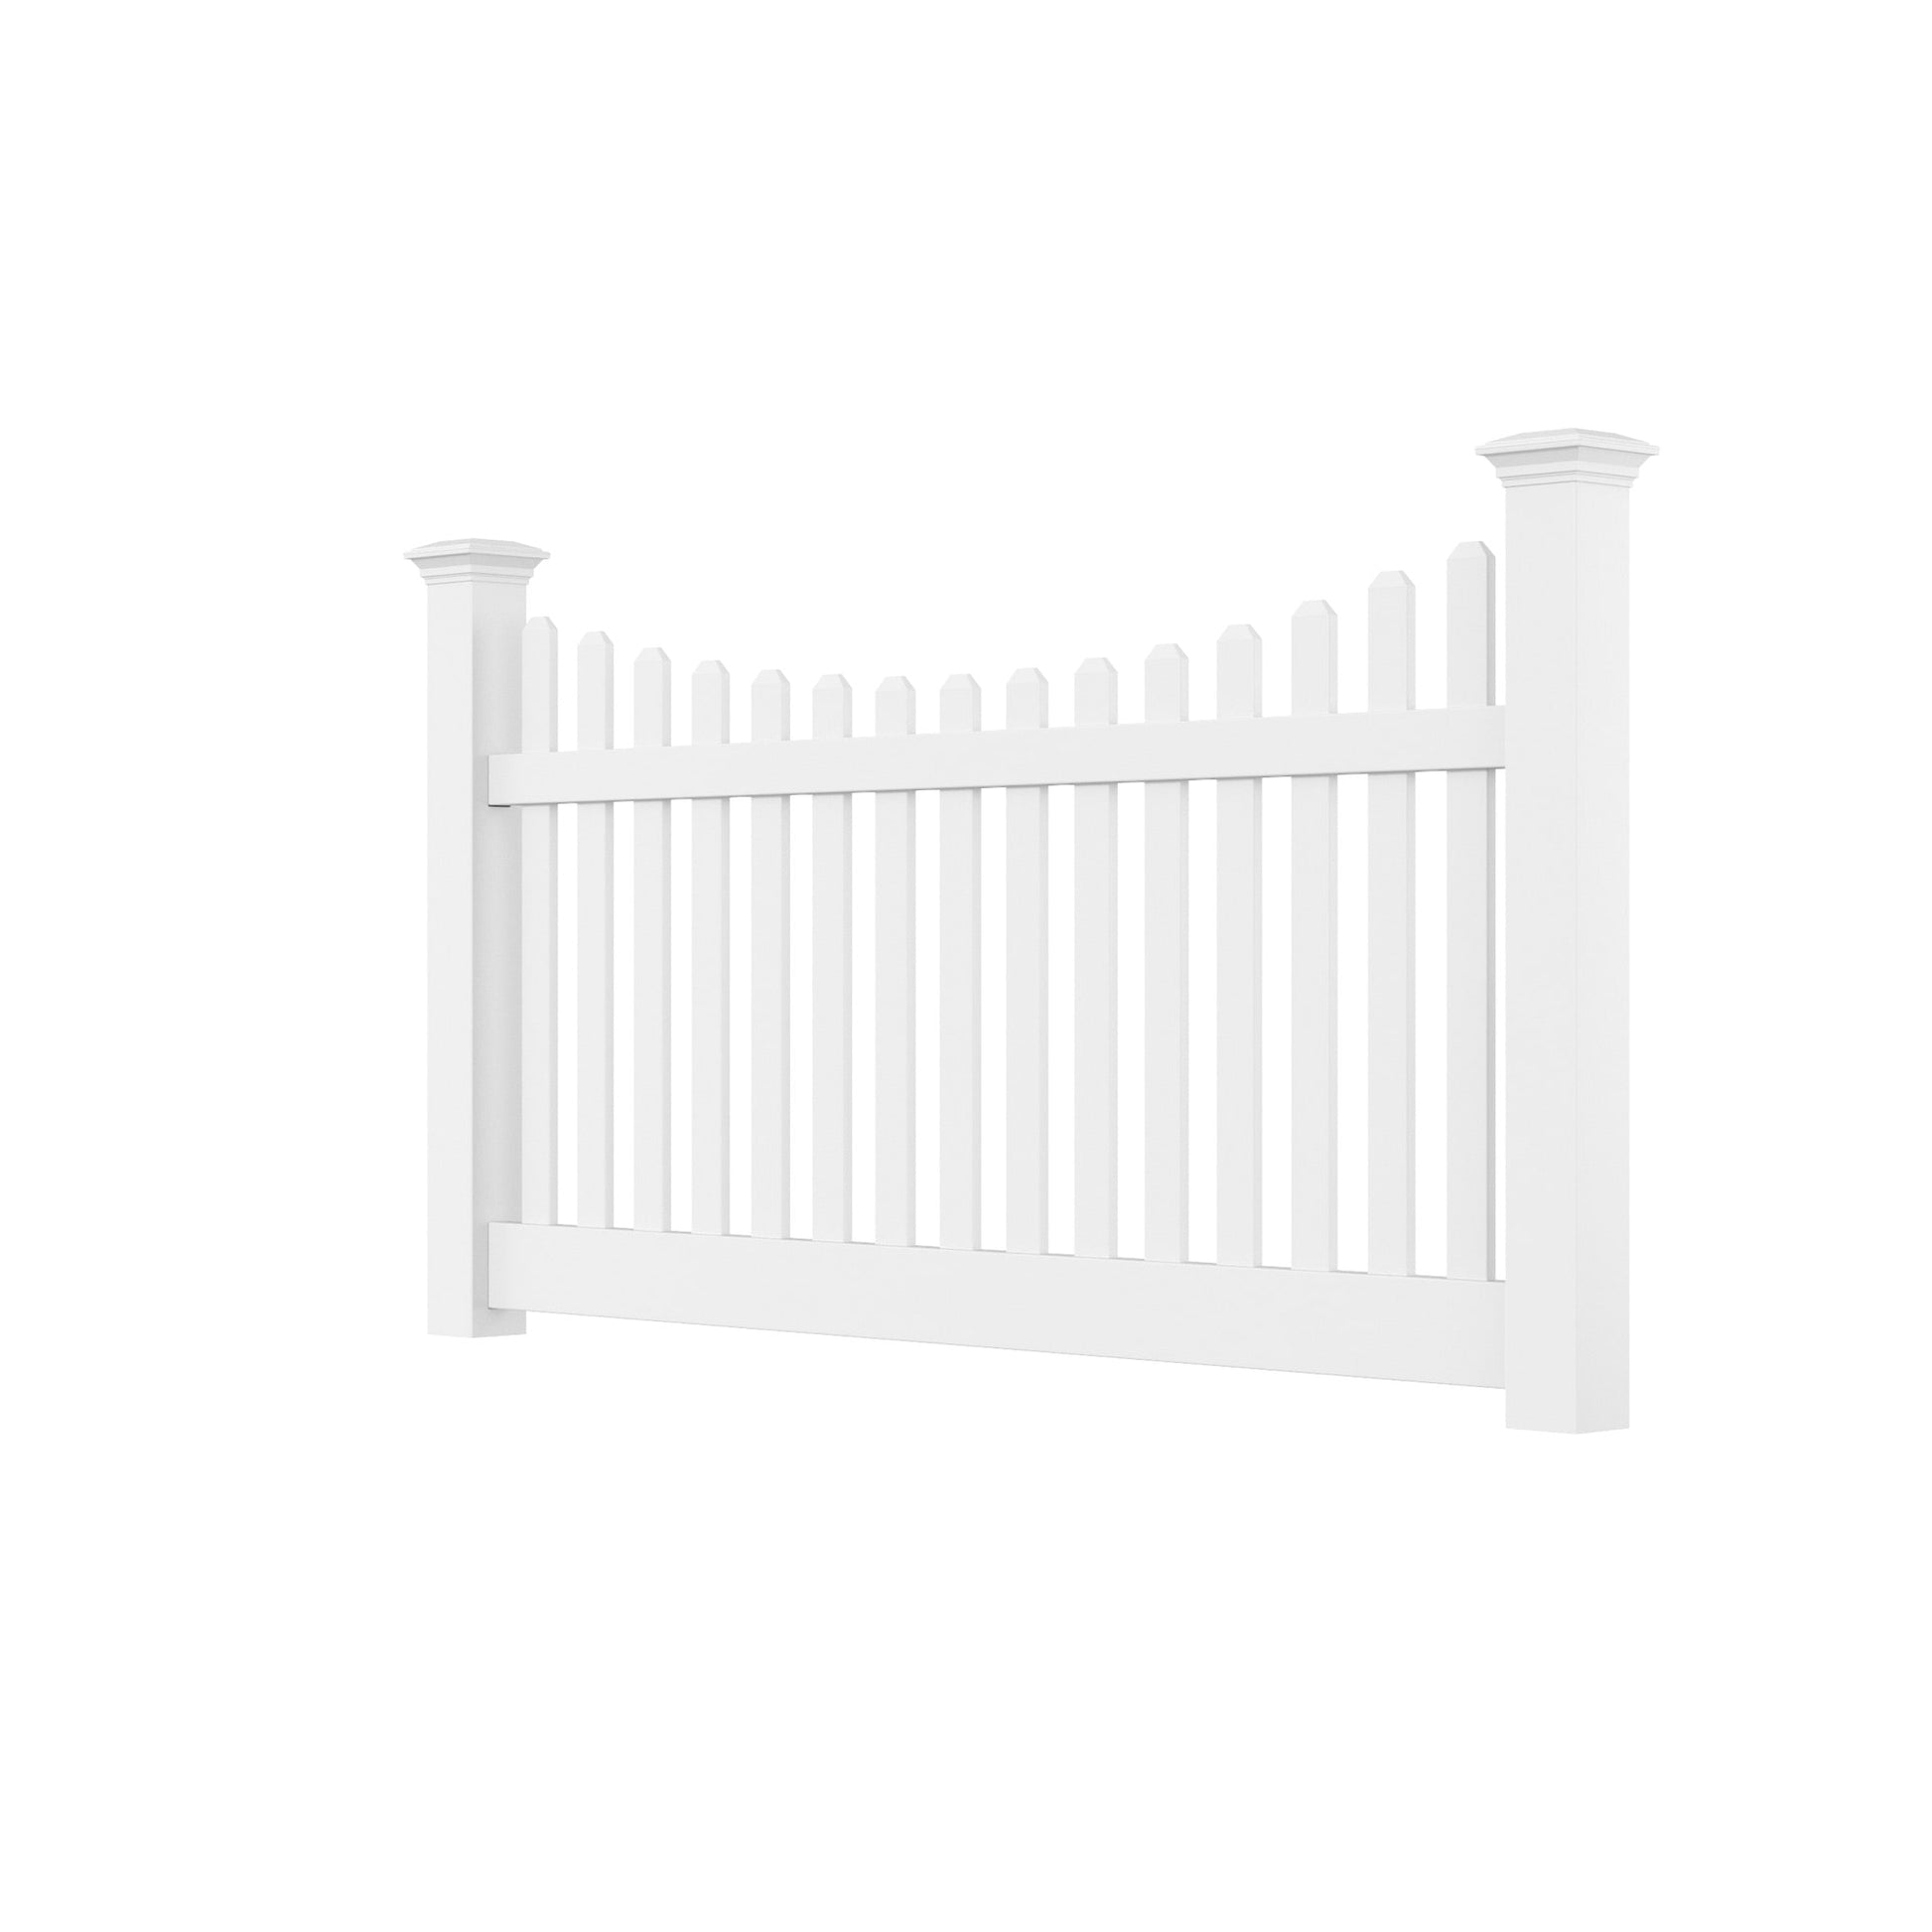 Silverbell Scallop Haven Series - Fence Panel - 4' x 8'-Vinyl Fence Panels-ActiveYards-White-FenceCenter